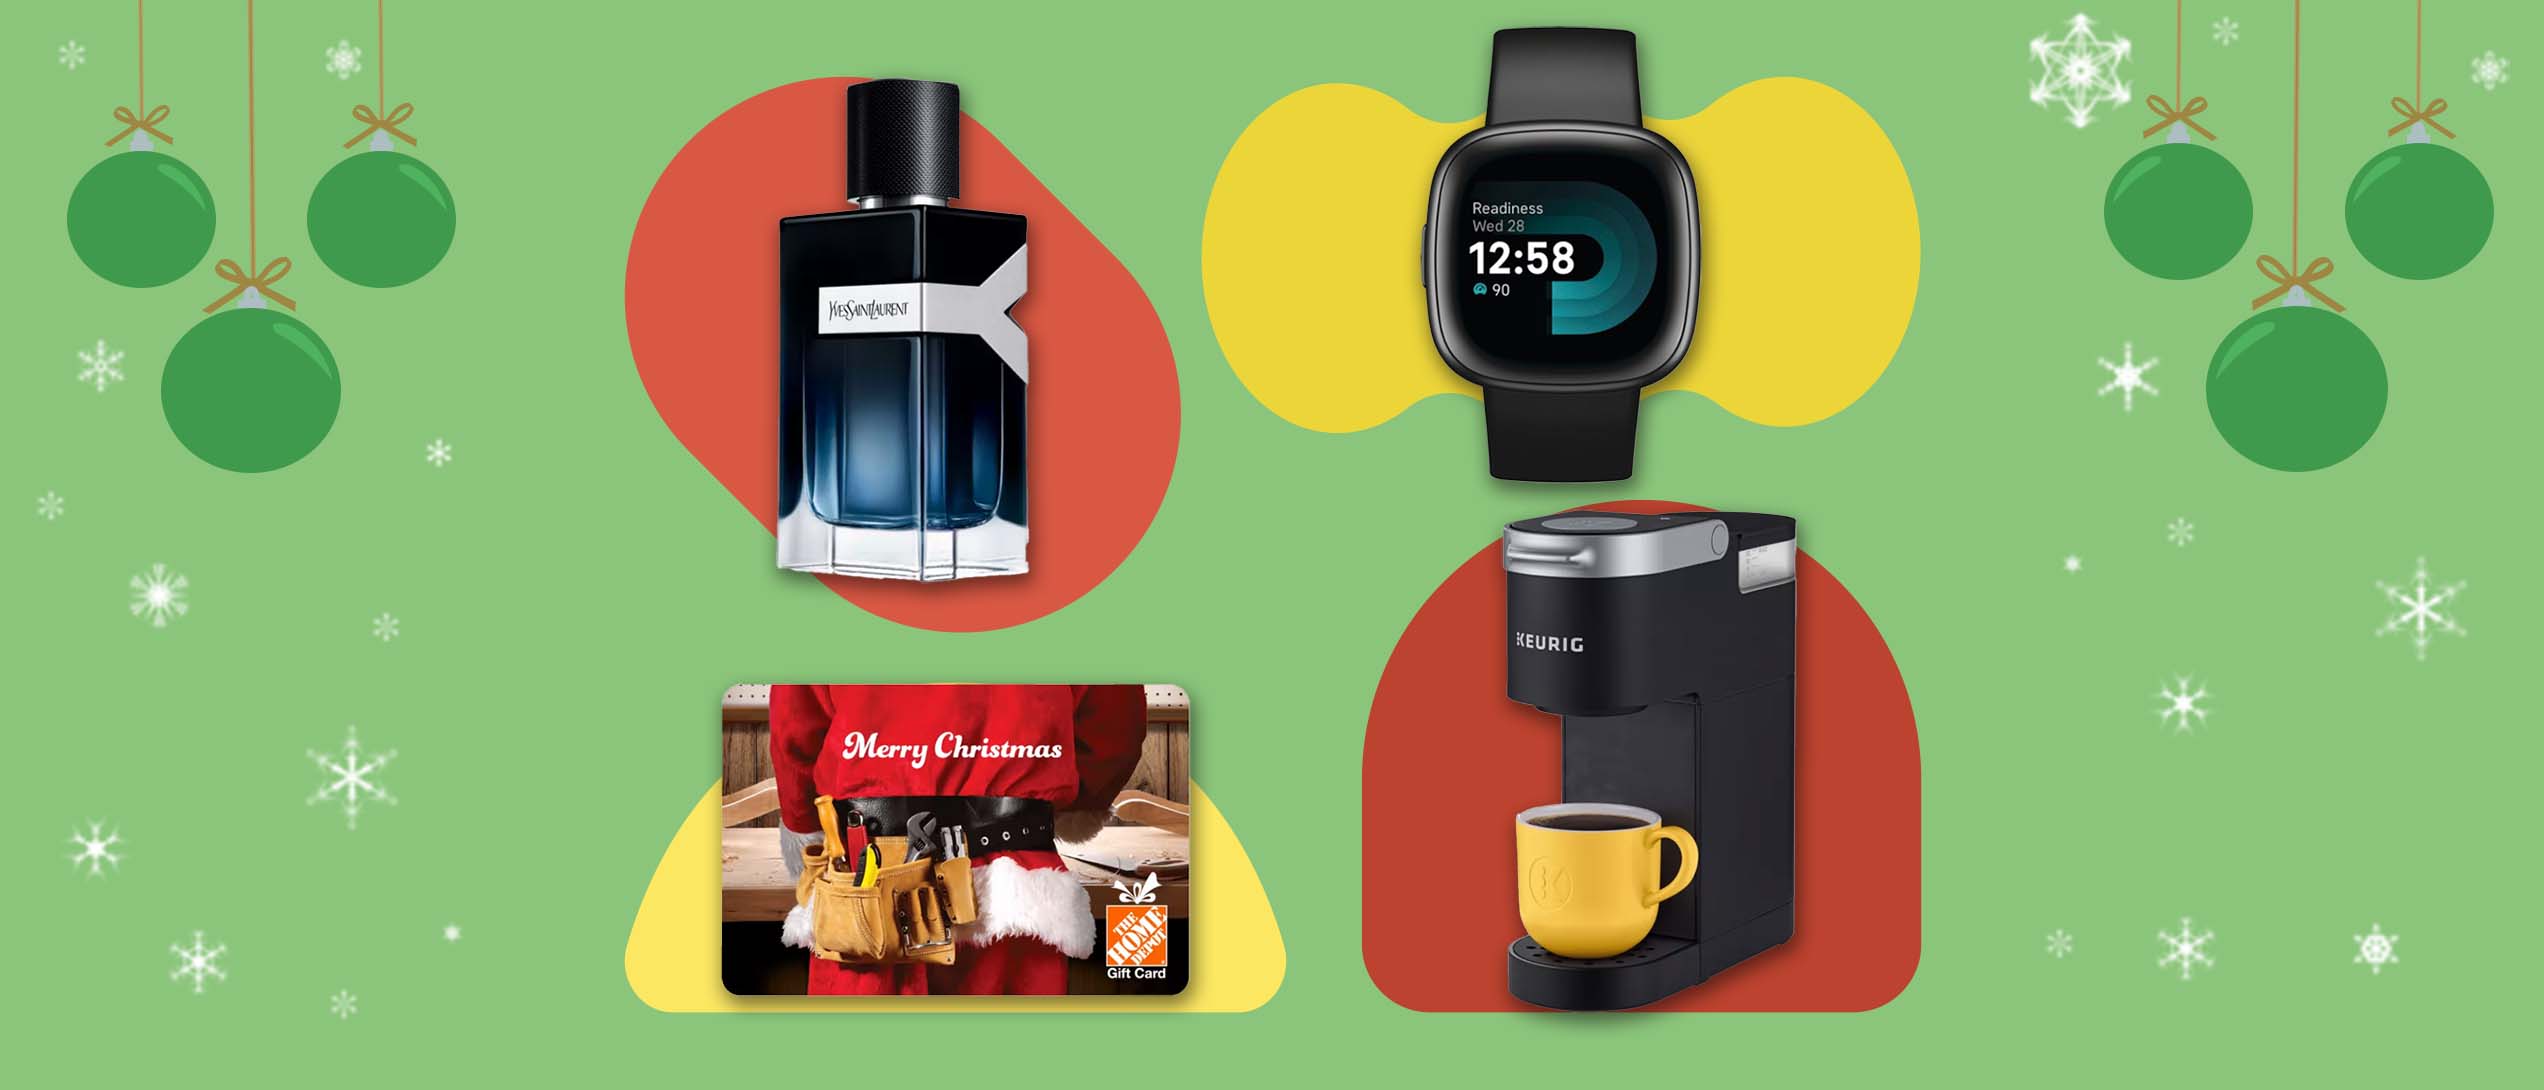 Image of Fitbit, gift card, coffee maker and perfume